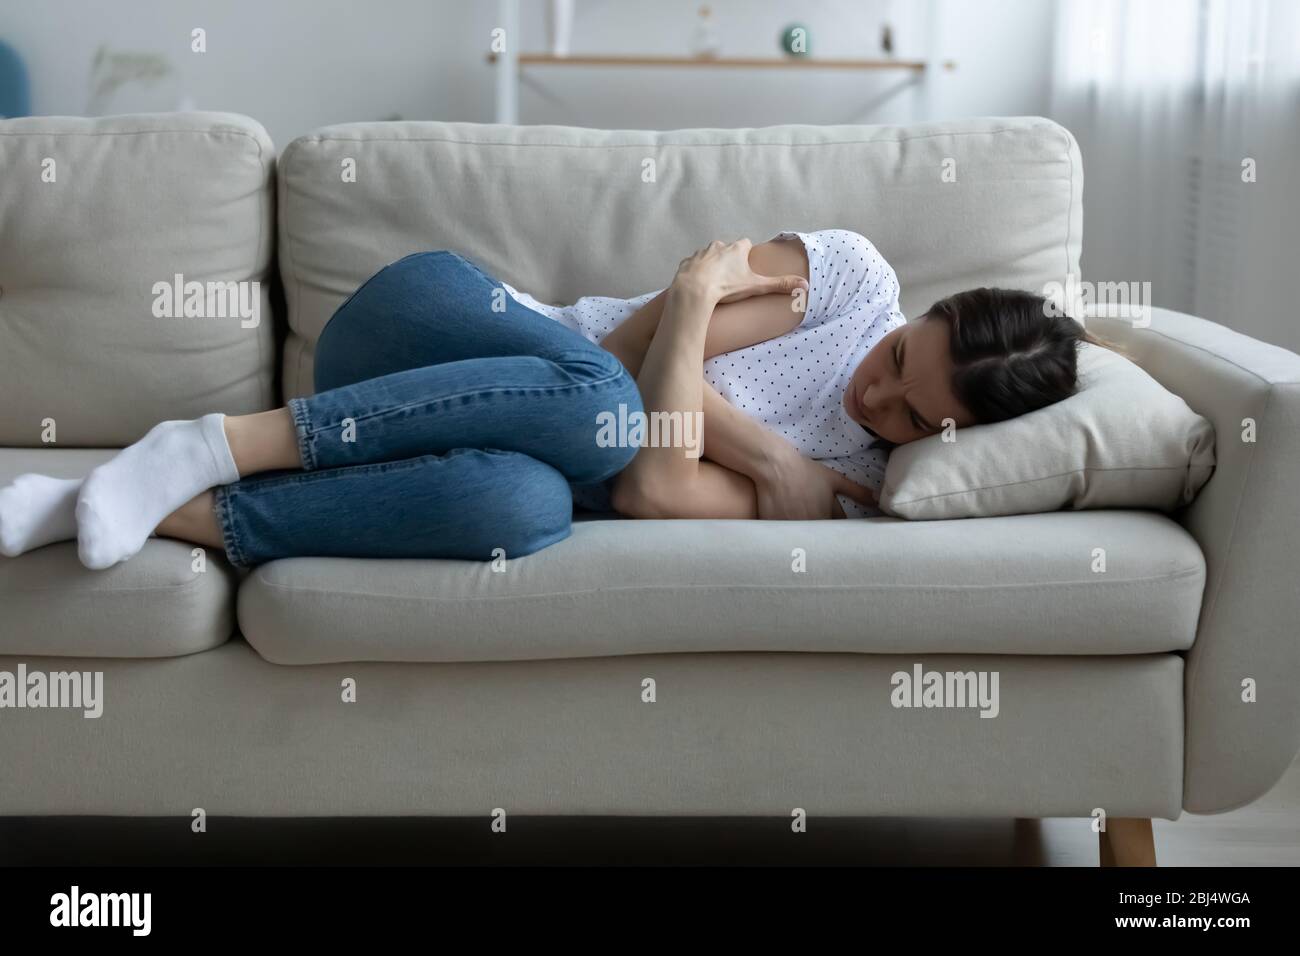 Upset young woman lying on couch feeling depressed Stock Photo